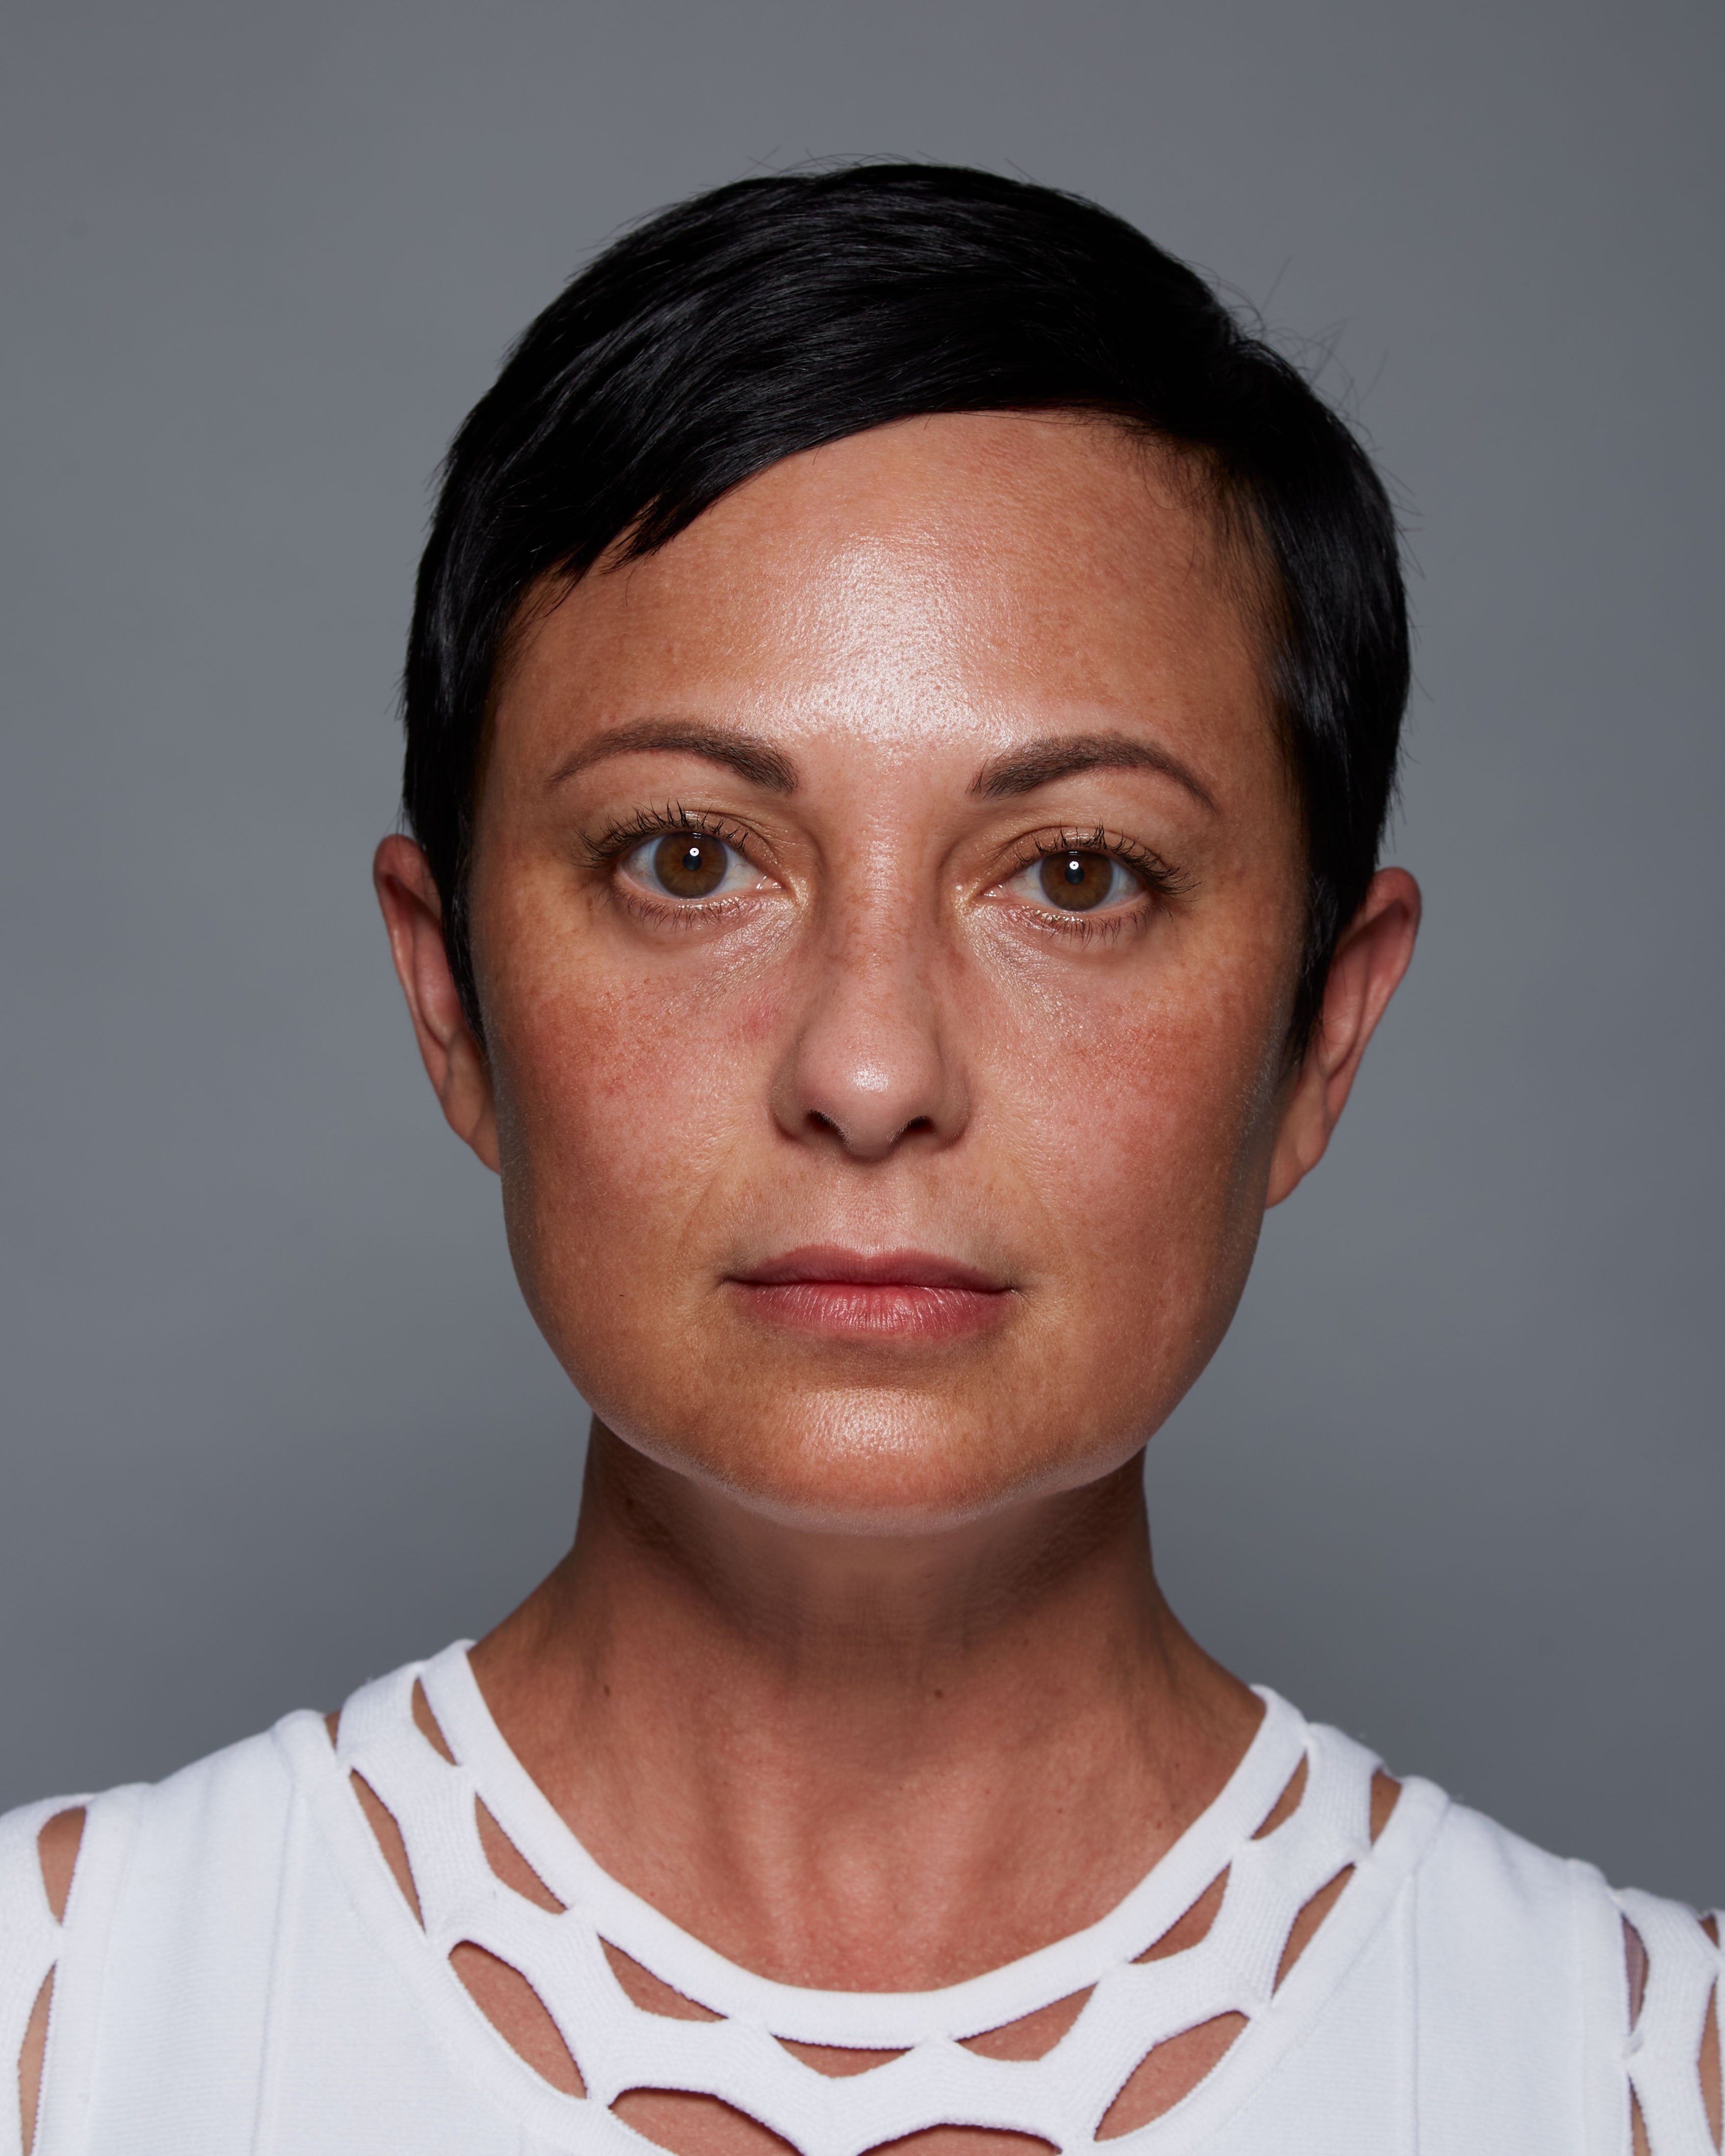 The "Before" headshot of a clinical subject who has used Michal Morrison Genesis BSTEM6 Molecular Serum, showing a woman with short brown hair and a white shirt looking at the camera.